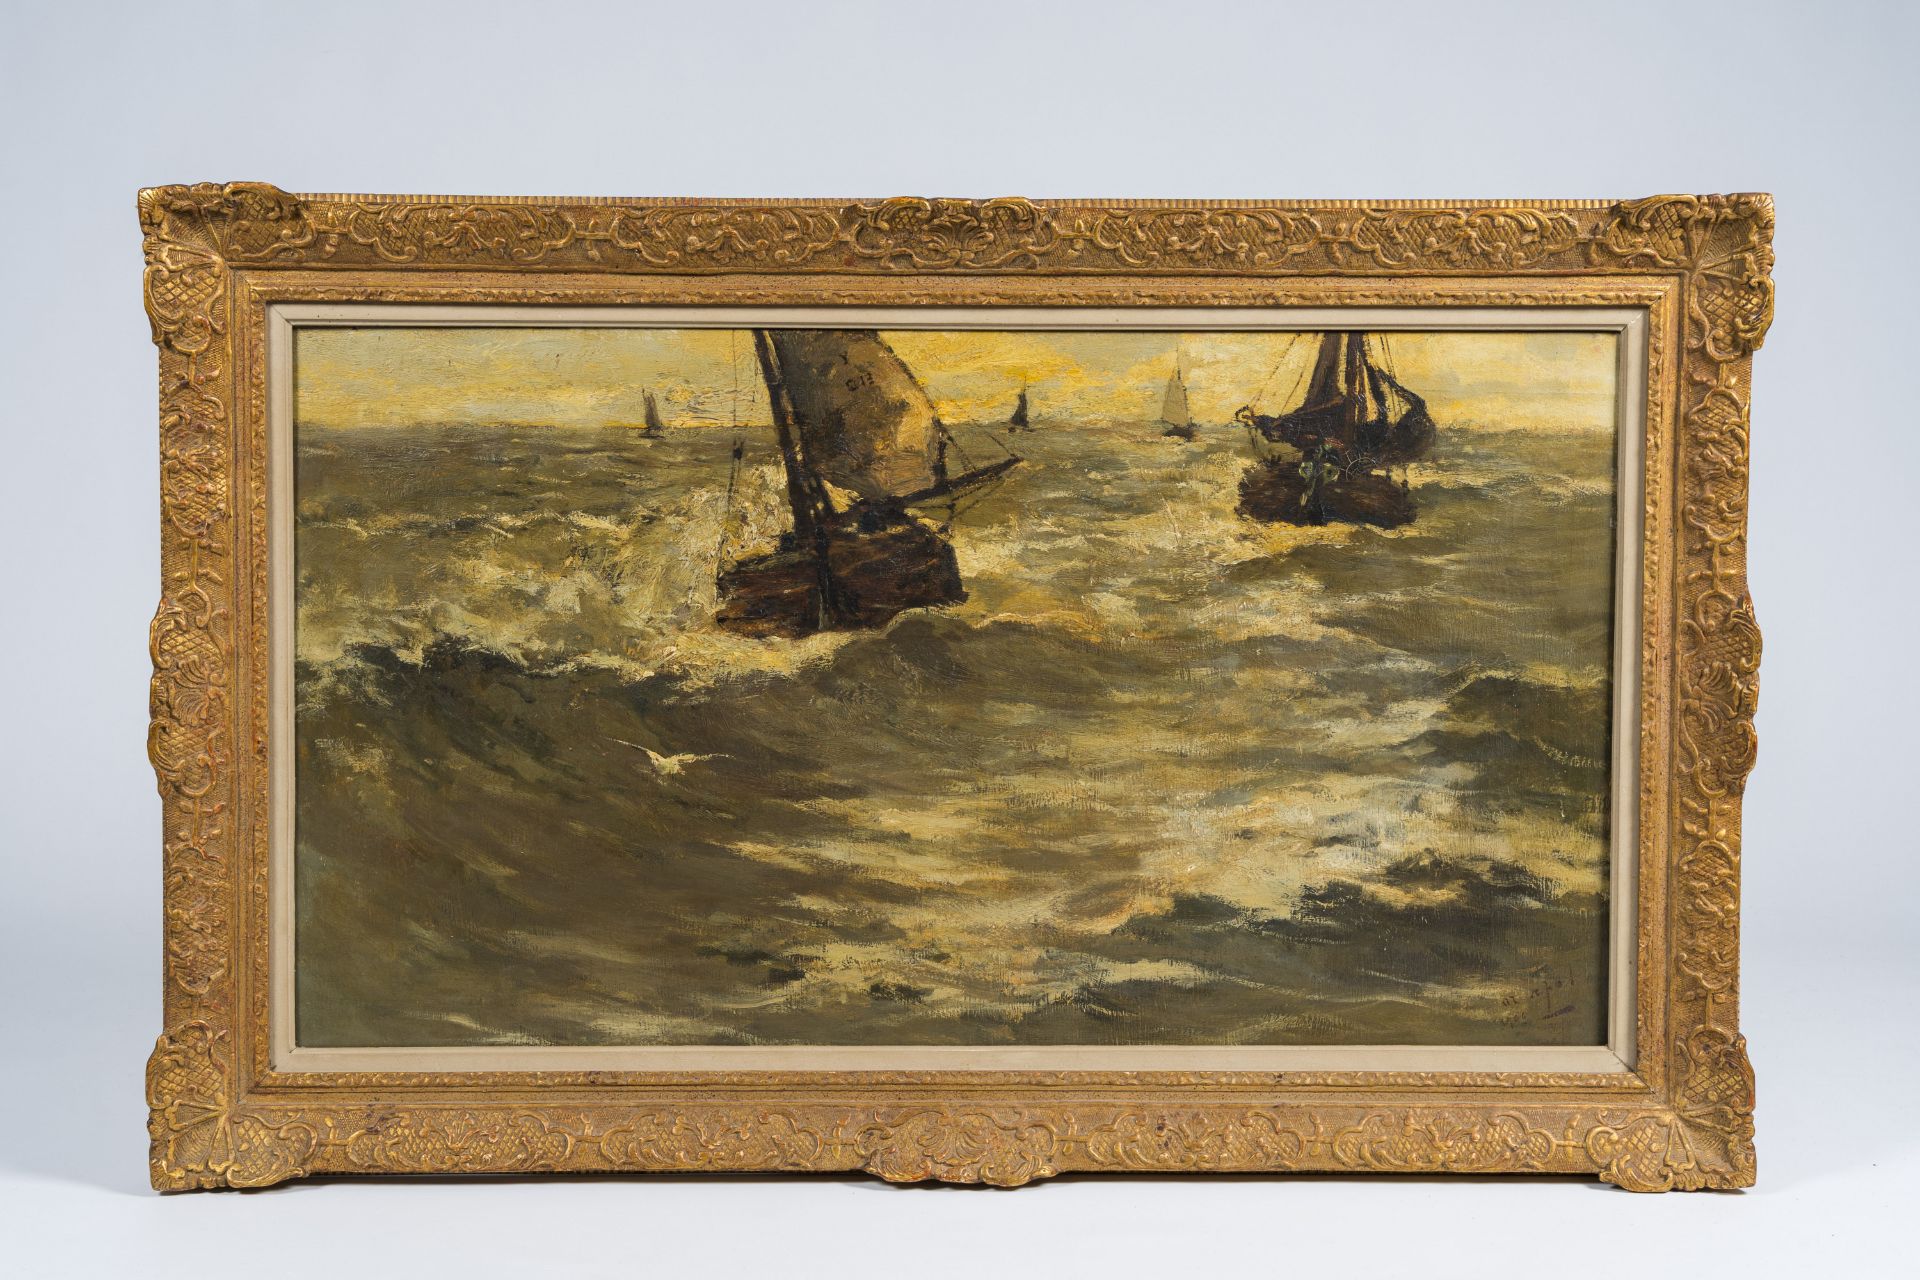 Armand Apol (1879-1950): Marine, oil on canvas, dated 1906 - Image 2 of 6